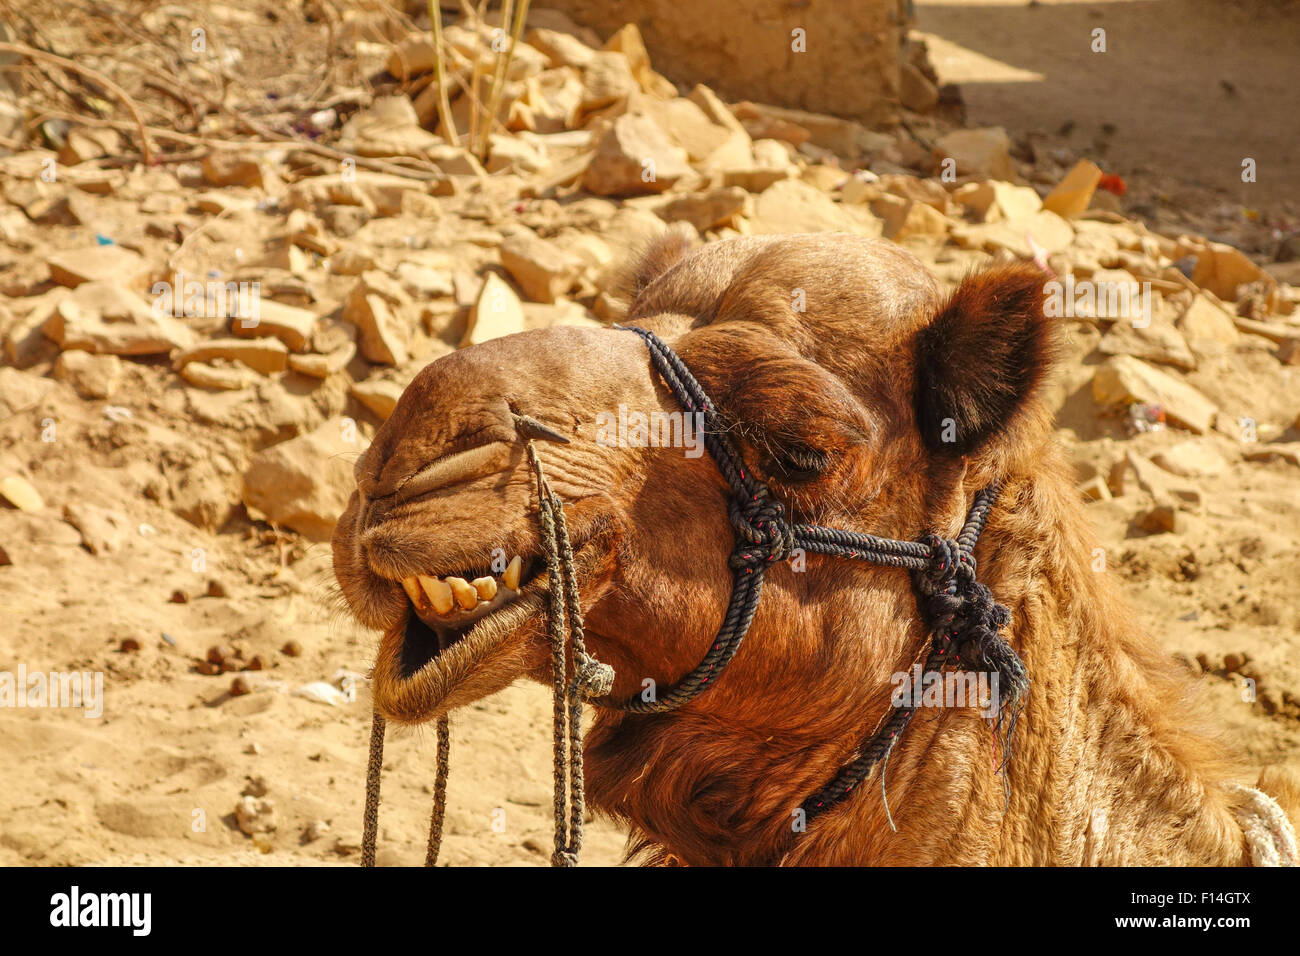 Closeup portrait of a cool funny camel showing his teeth, smirking. Stock Photo